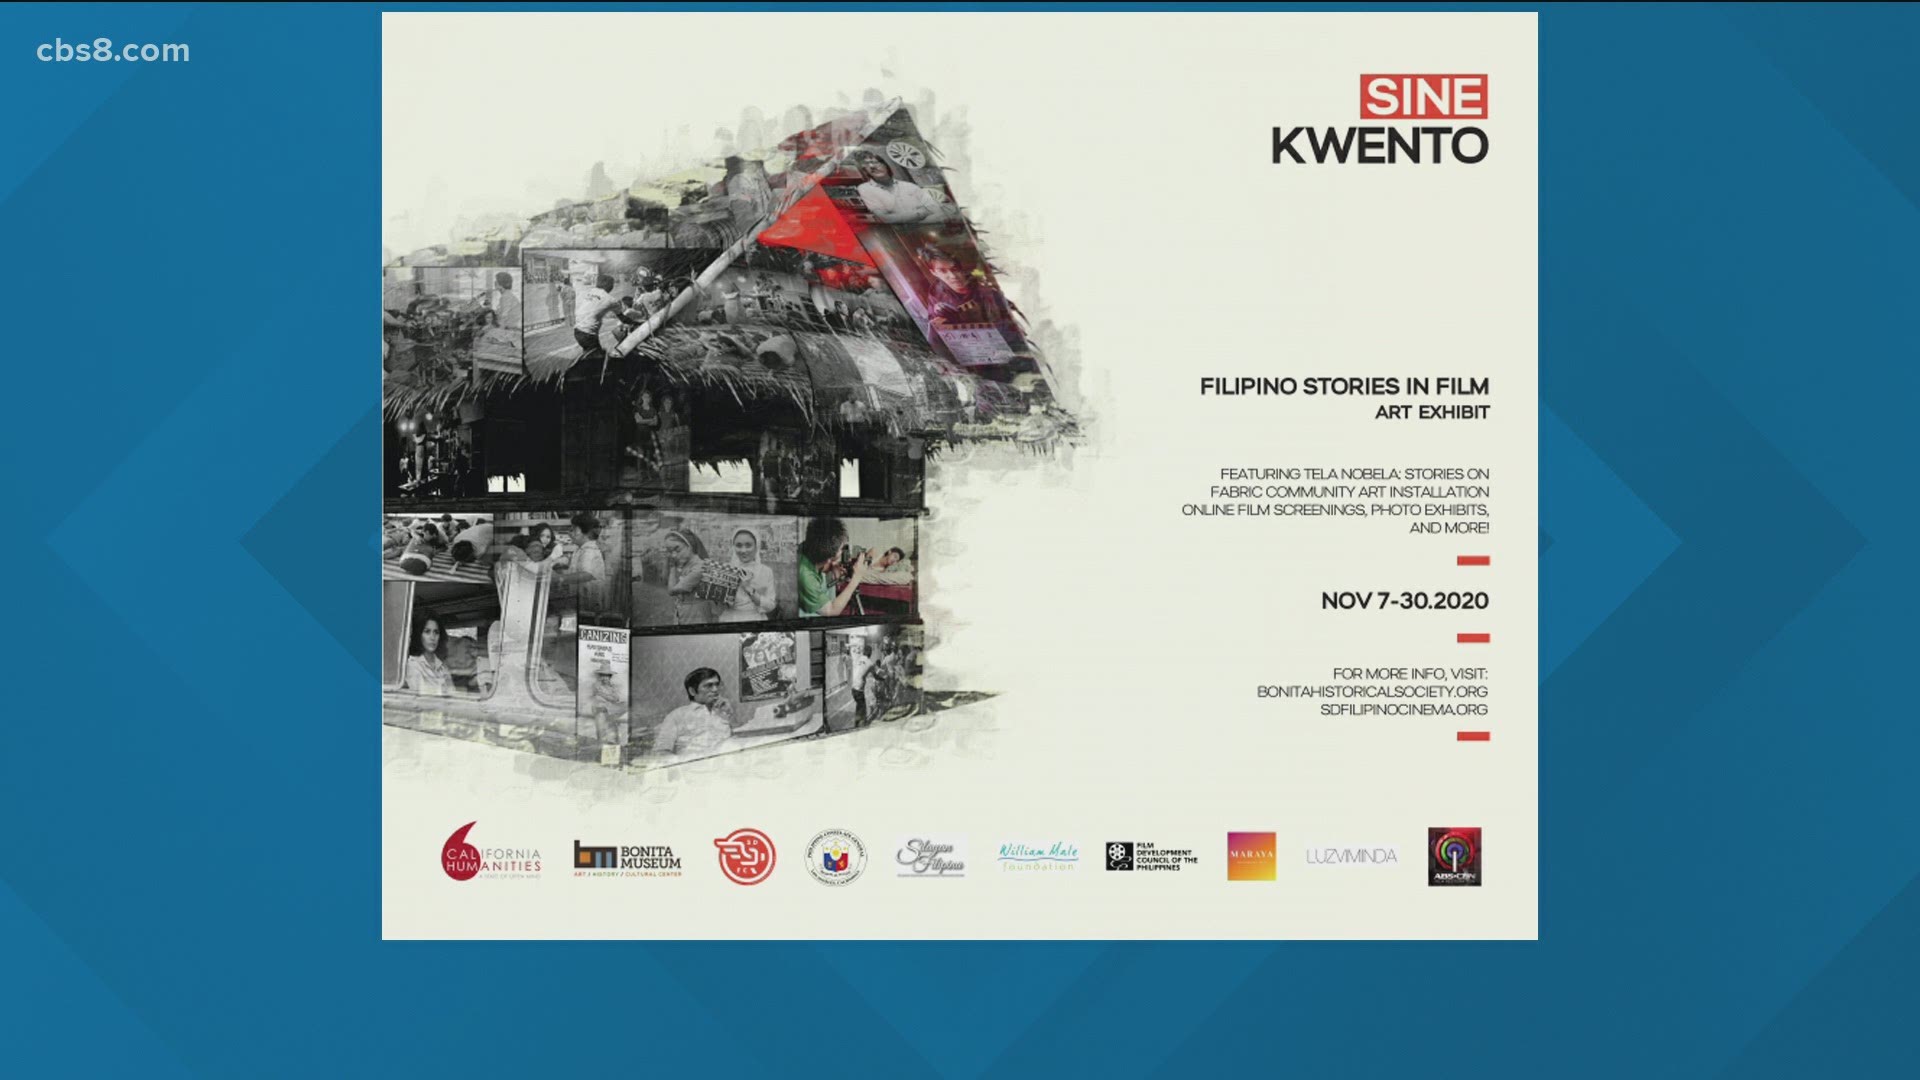 The movie's director, Benito Bautista along with actor Eric Joshua joined The Four to talk about The 'Sine Kwento Exhibition.'